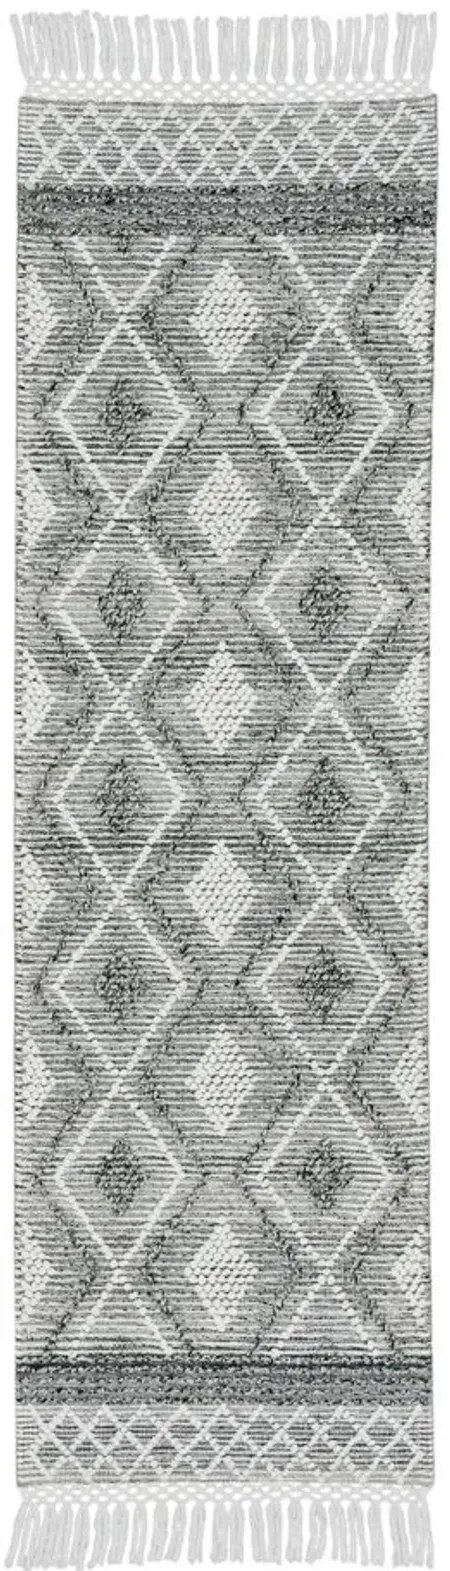 Nicole Curtis Harajuku Runner Rug in Gray/Ivory by Nourison